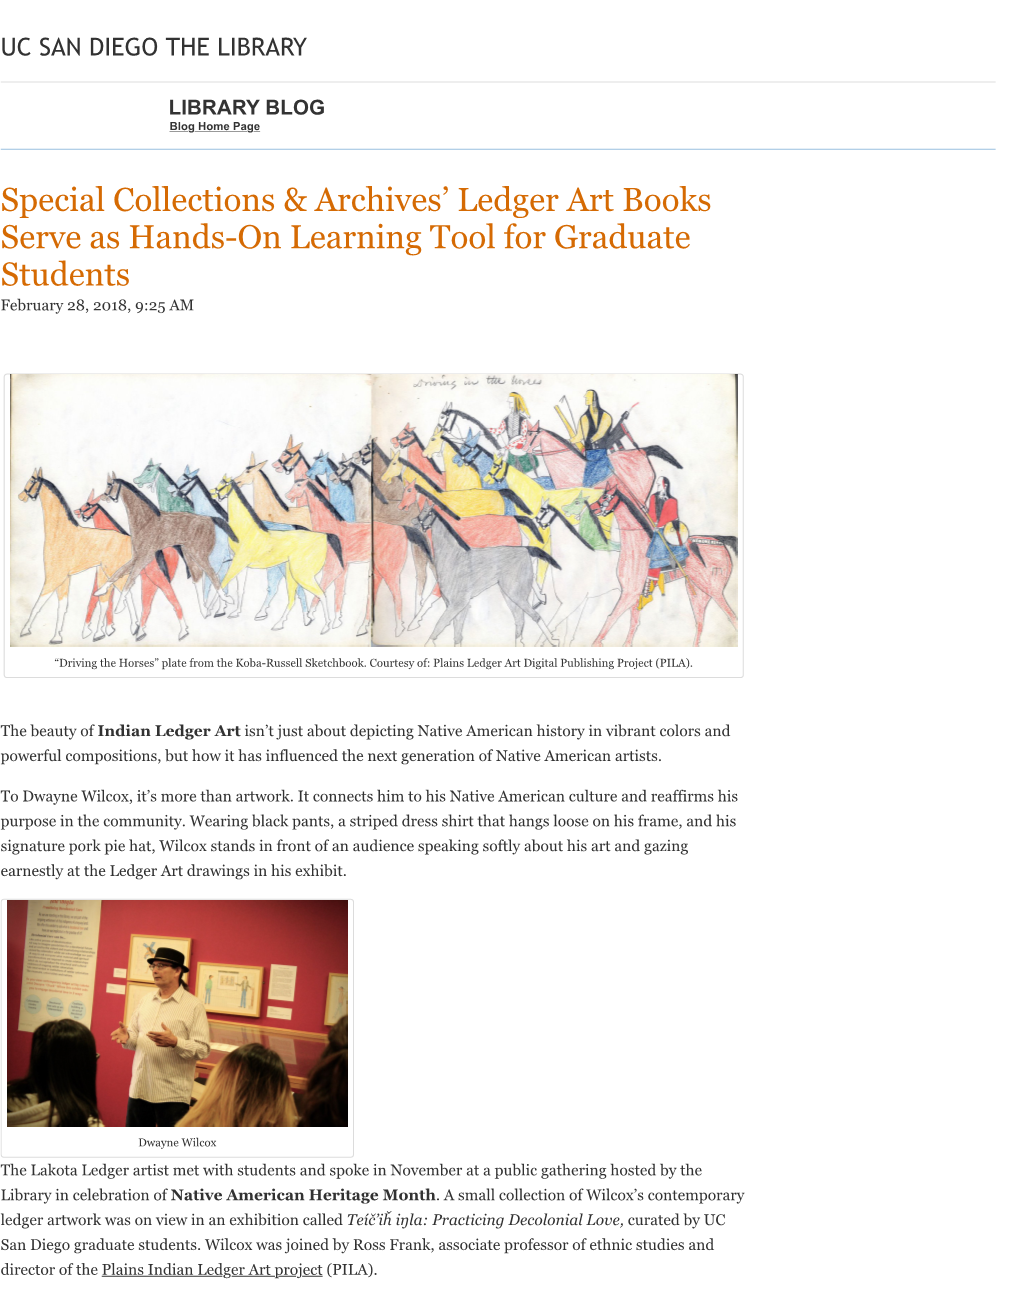 Special Collections & Archives' Ledger Art Books Serve As Hands